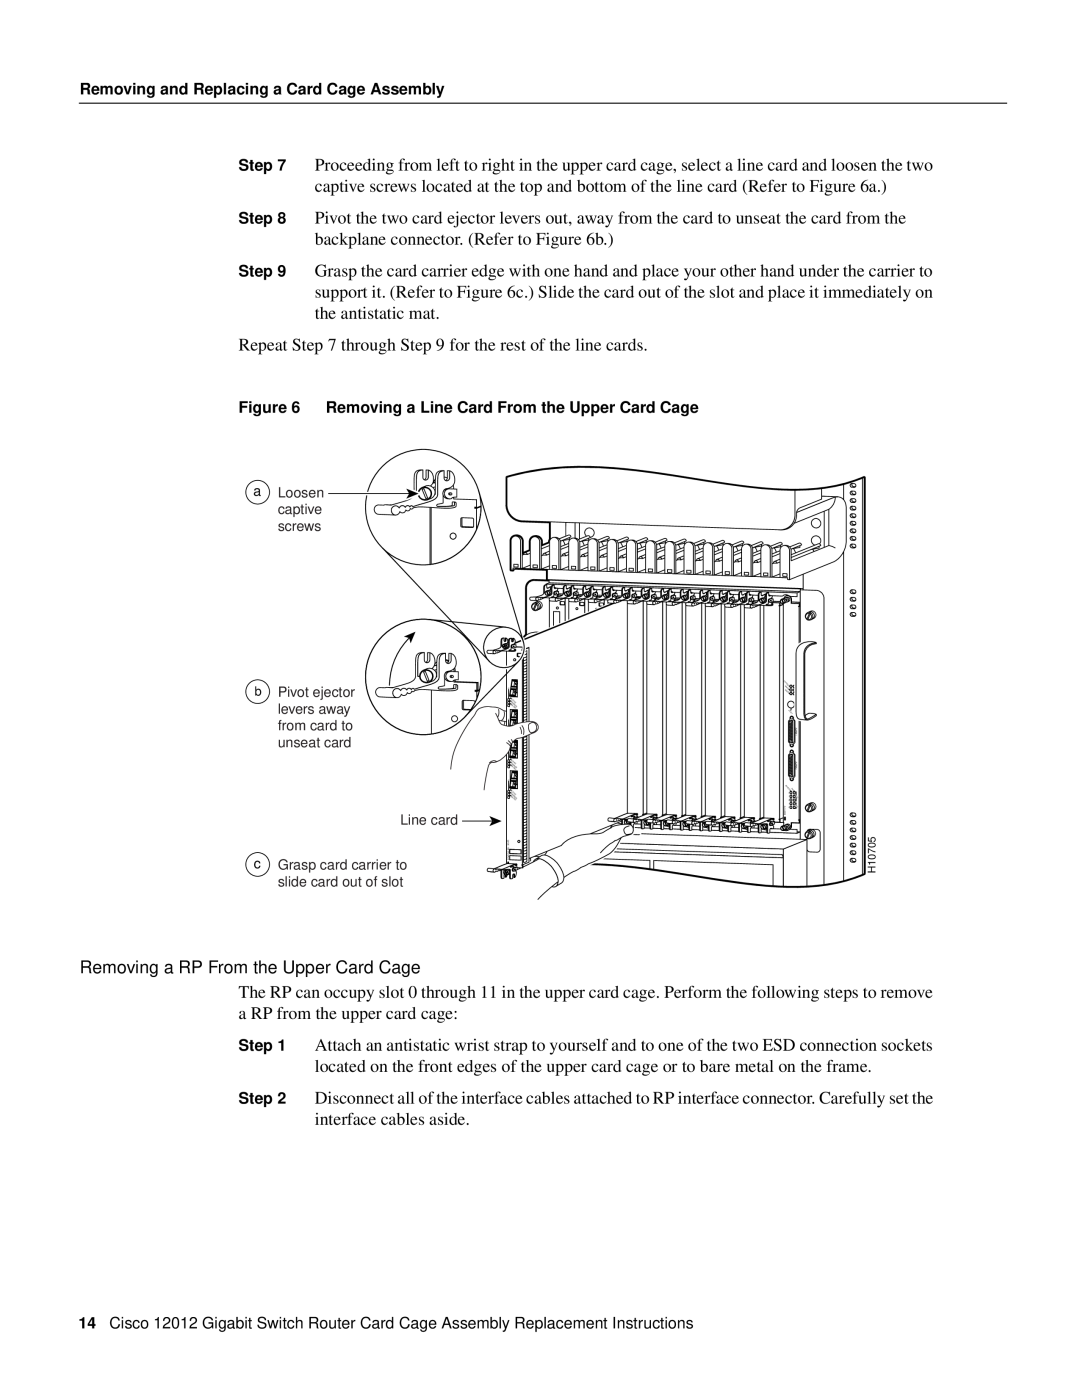 Cisco Systems 12012 manual Removing a RP From the Upper Card Cage, a Loosen captive screws, b Pivot ejector, levers away 